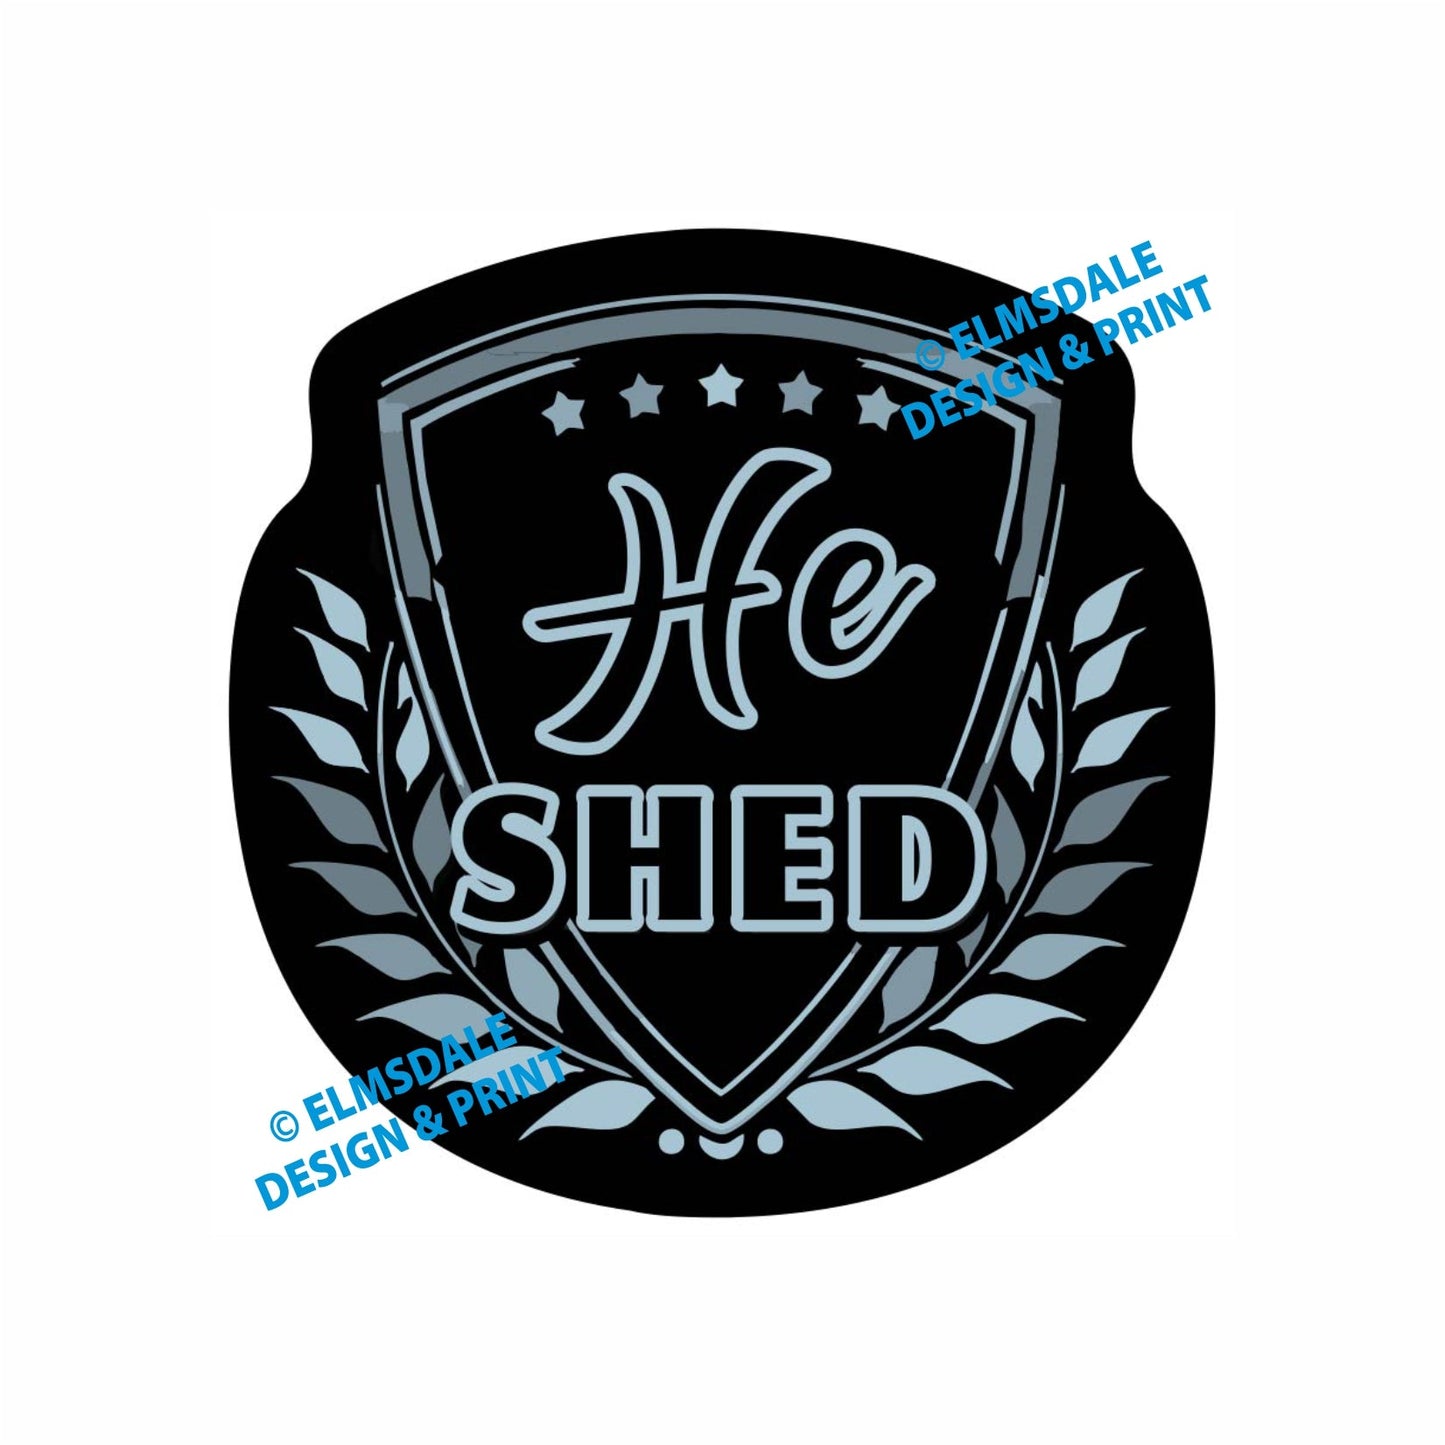 He Shed - Decal / 9.25’ x 9.25’ / Silver & Black